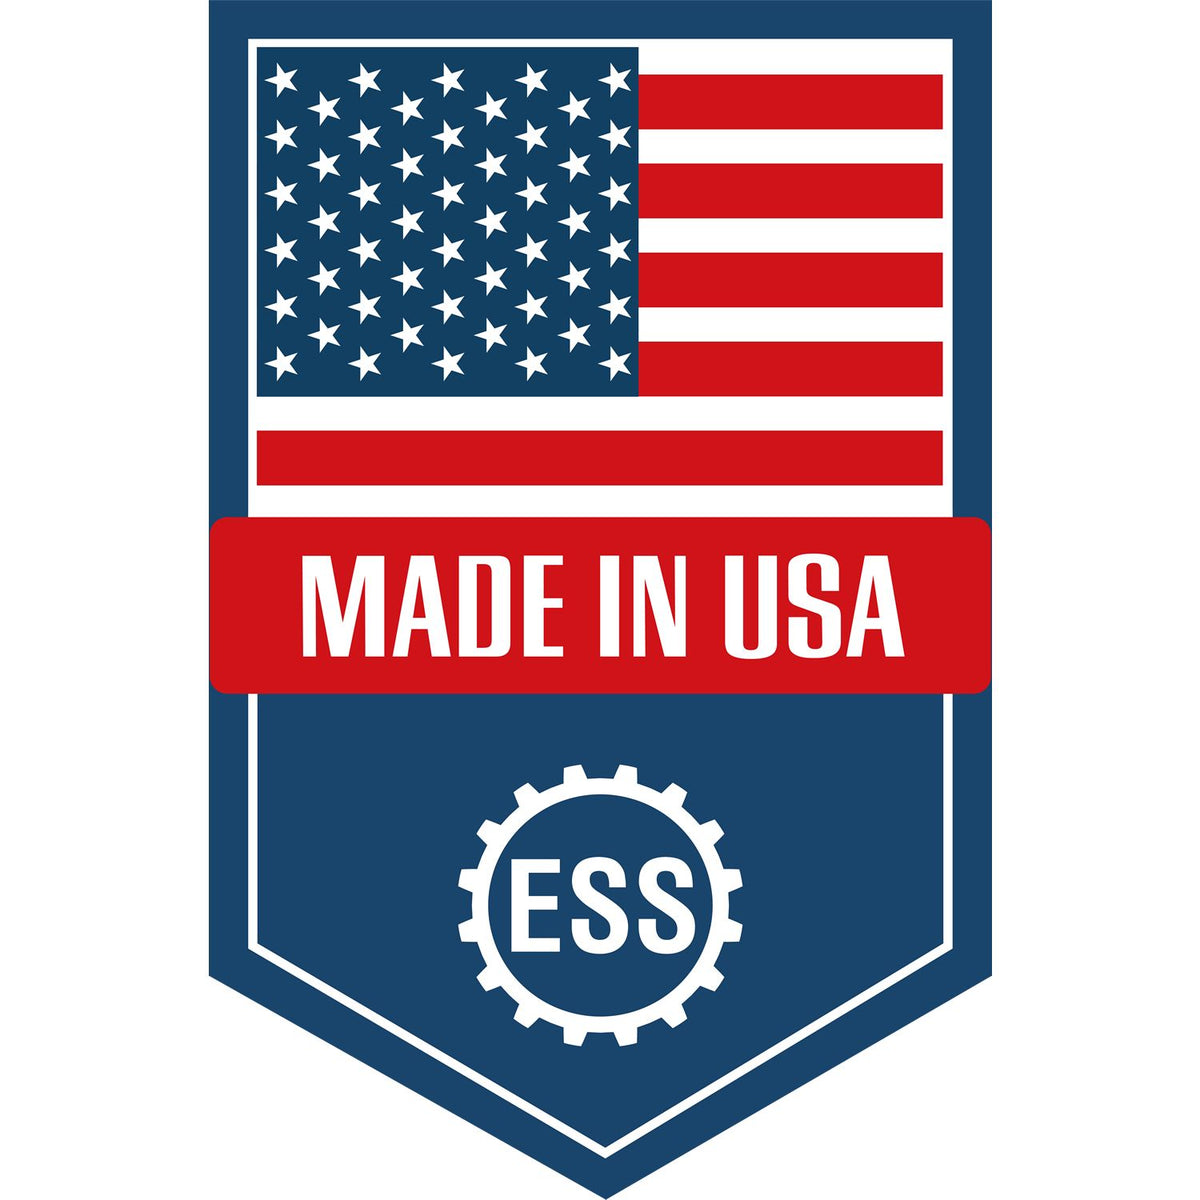 An icon or graphic with an american flag and text reading Made in USA for the Slim Pre-Inked Wisconsin Professional Engineer Seal Stamp